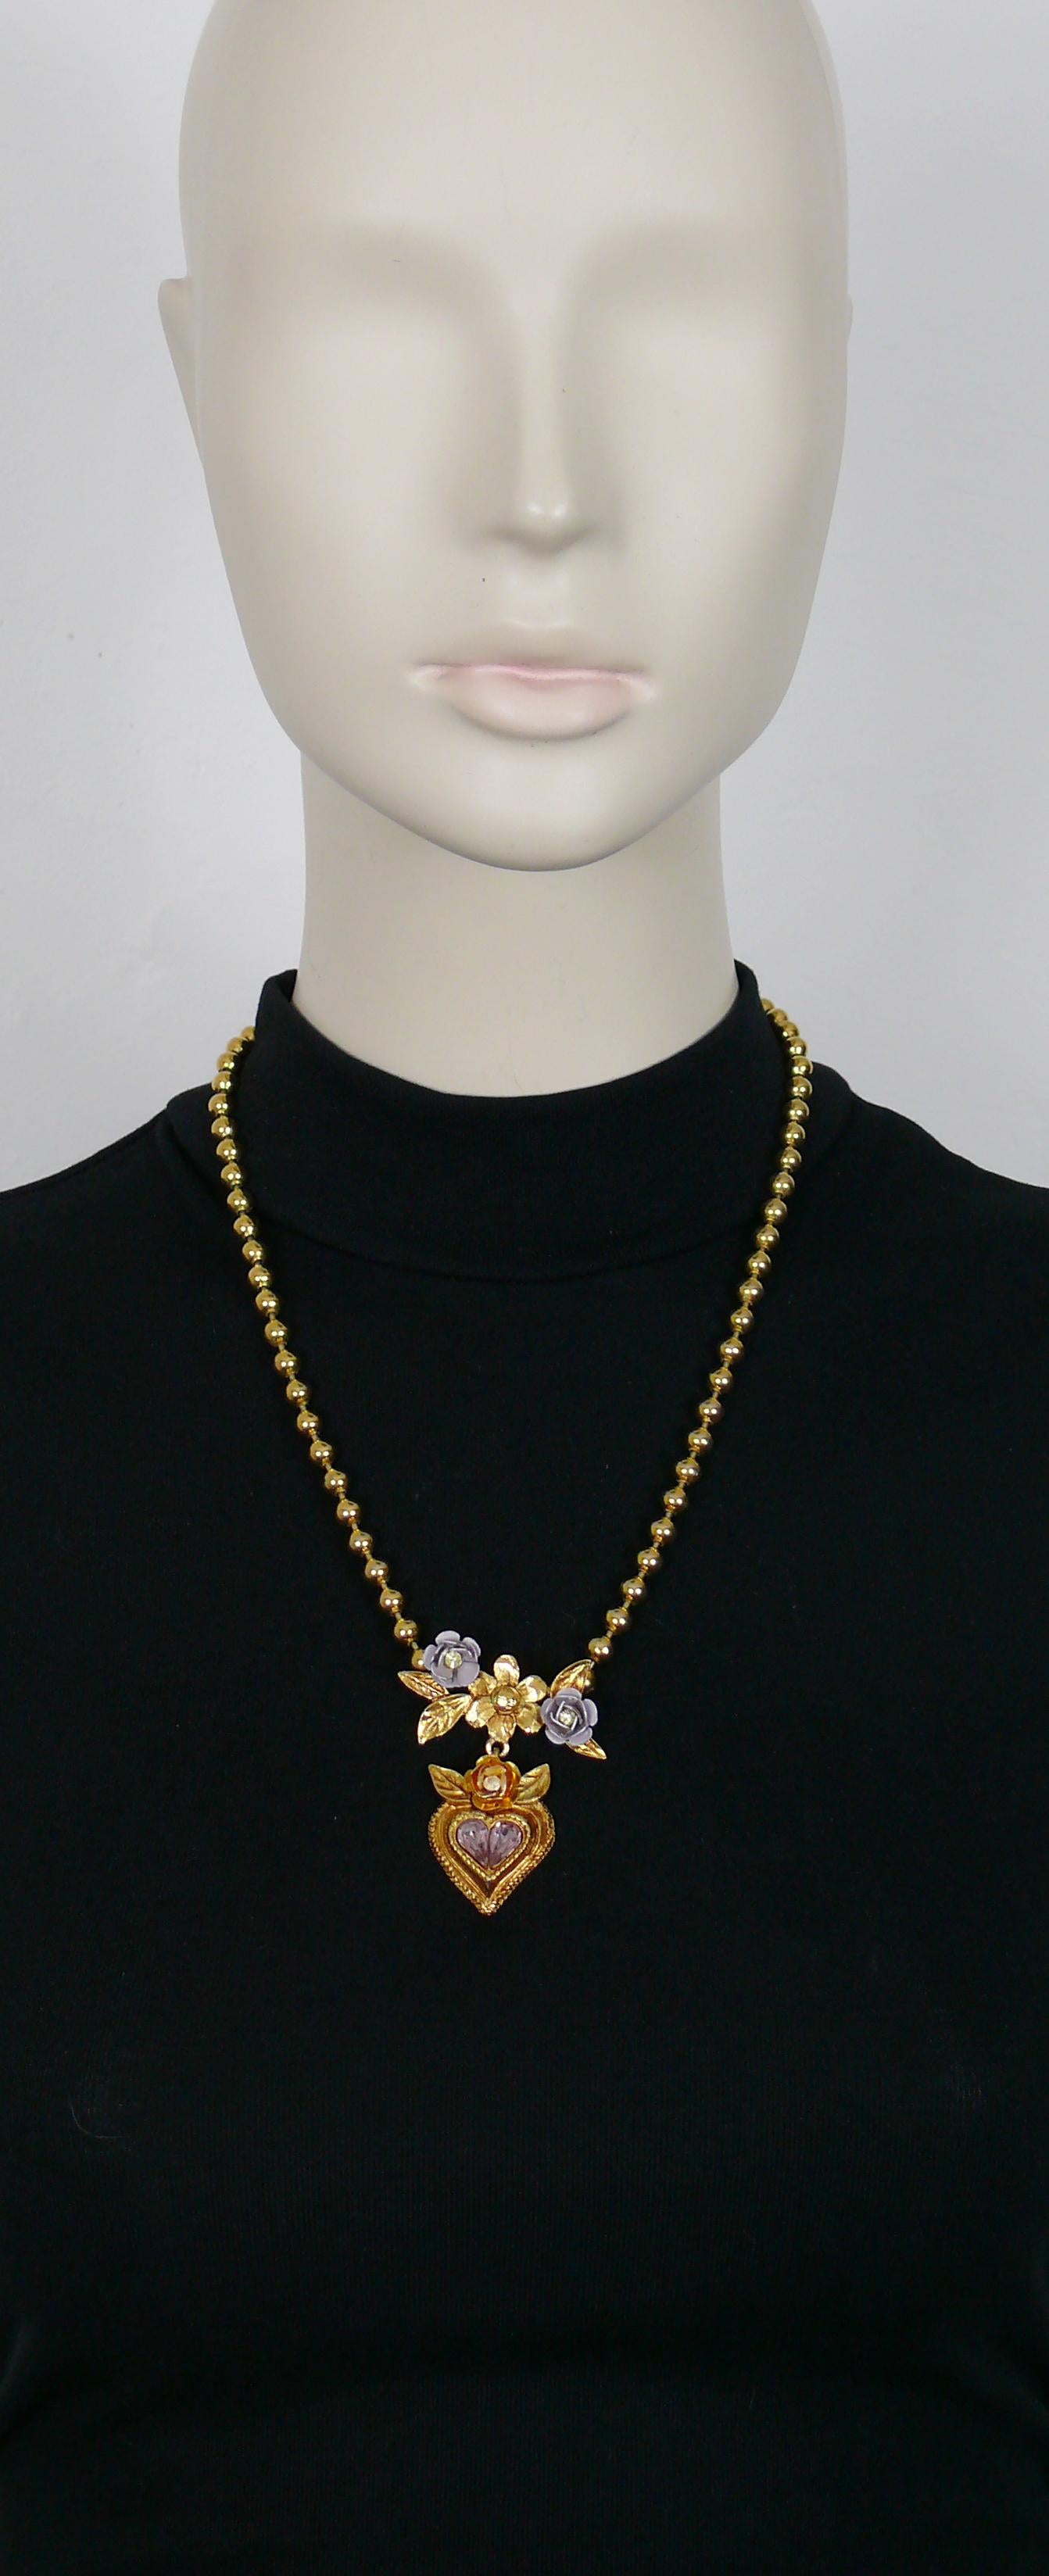 CHRISTIAN LACROIX vintage gold toned ball chain necklace featuring a heart pendant adorned with flowers embellished with lilac and cleary yellow crystals.

Hook clasp closure.

Marked CHRISTIAN LACROIX CL Made in France.

Indicative measurements :